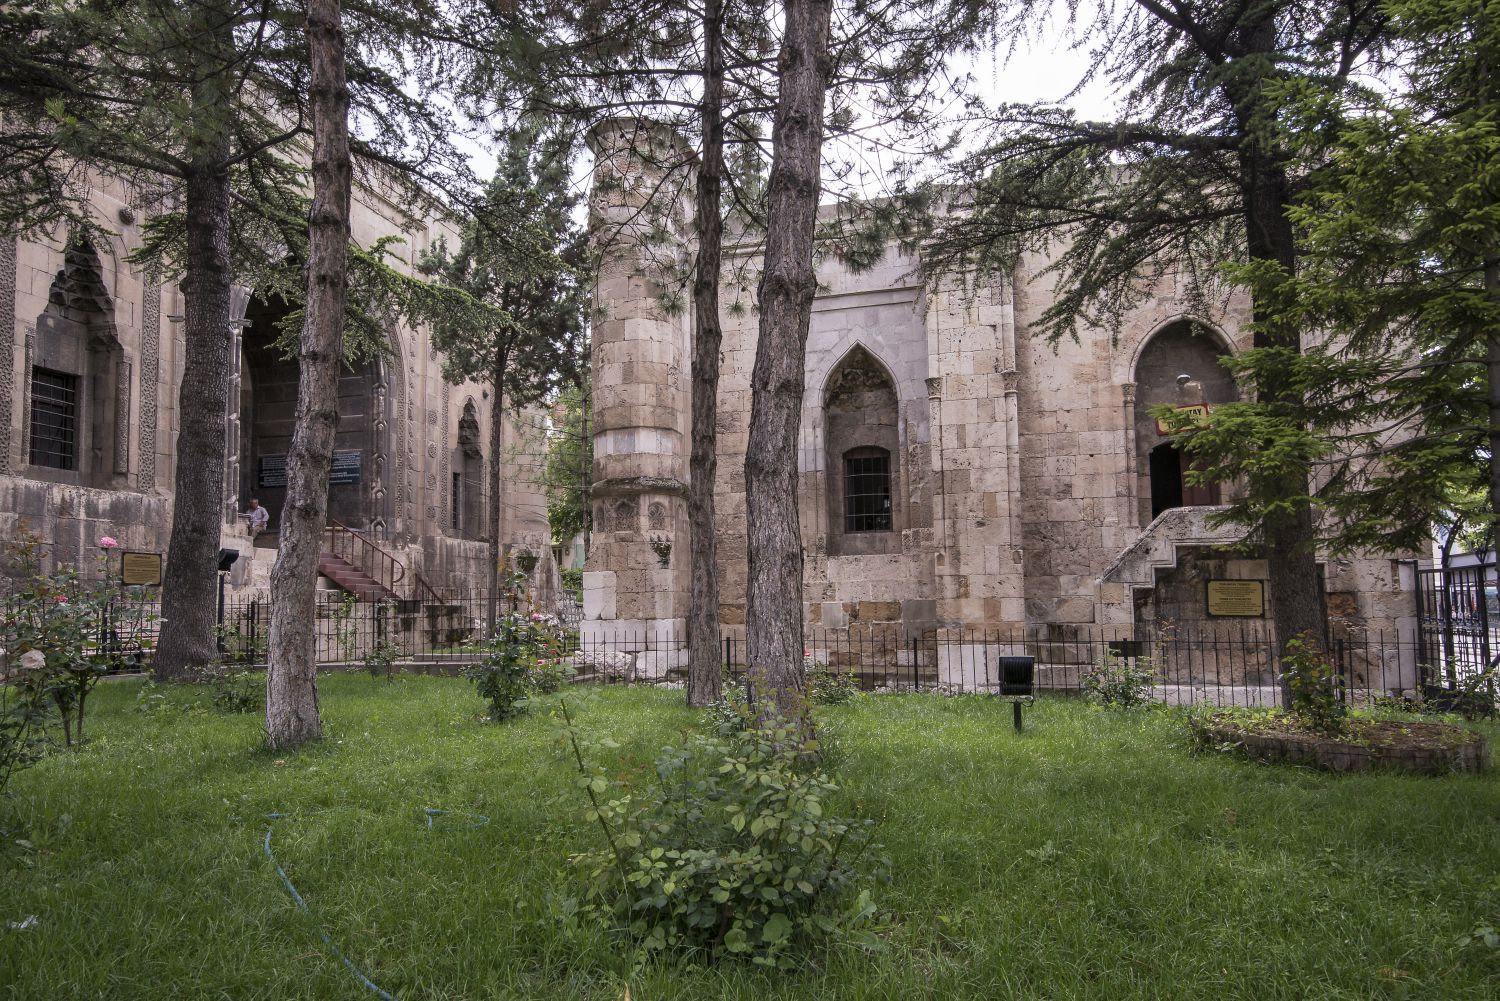 Exterior view of complex showing the southern facade of the Gökmedrese at left and the western facade of Torumtay Tomb at right.<p class="MsoNormal"><o:p></o:p></p><p class="MsoNormal"><o:p></o:p></p>